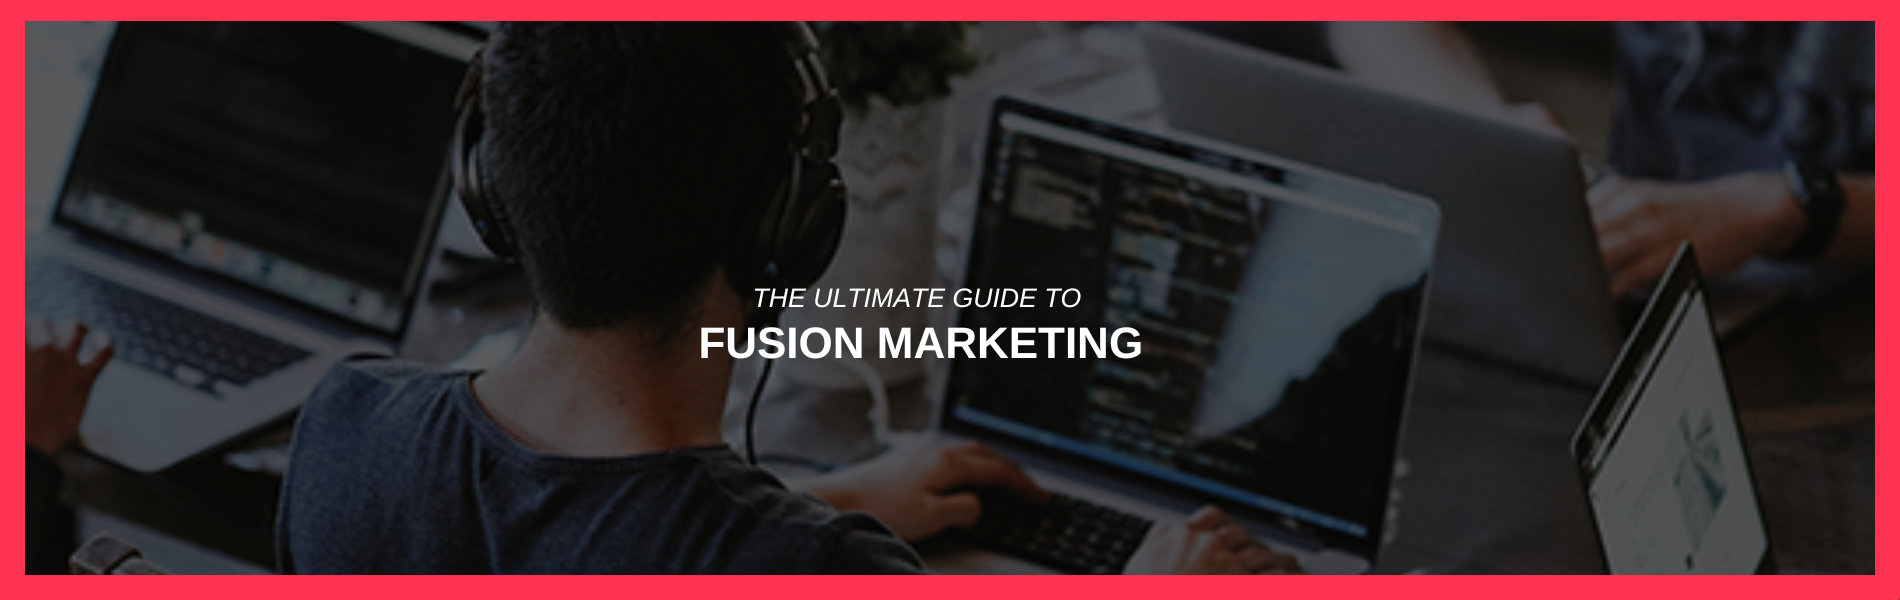 The Ultimate Guide to Fusion Marketing